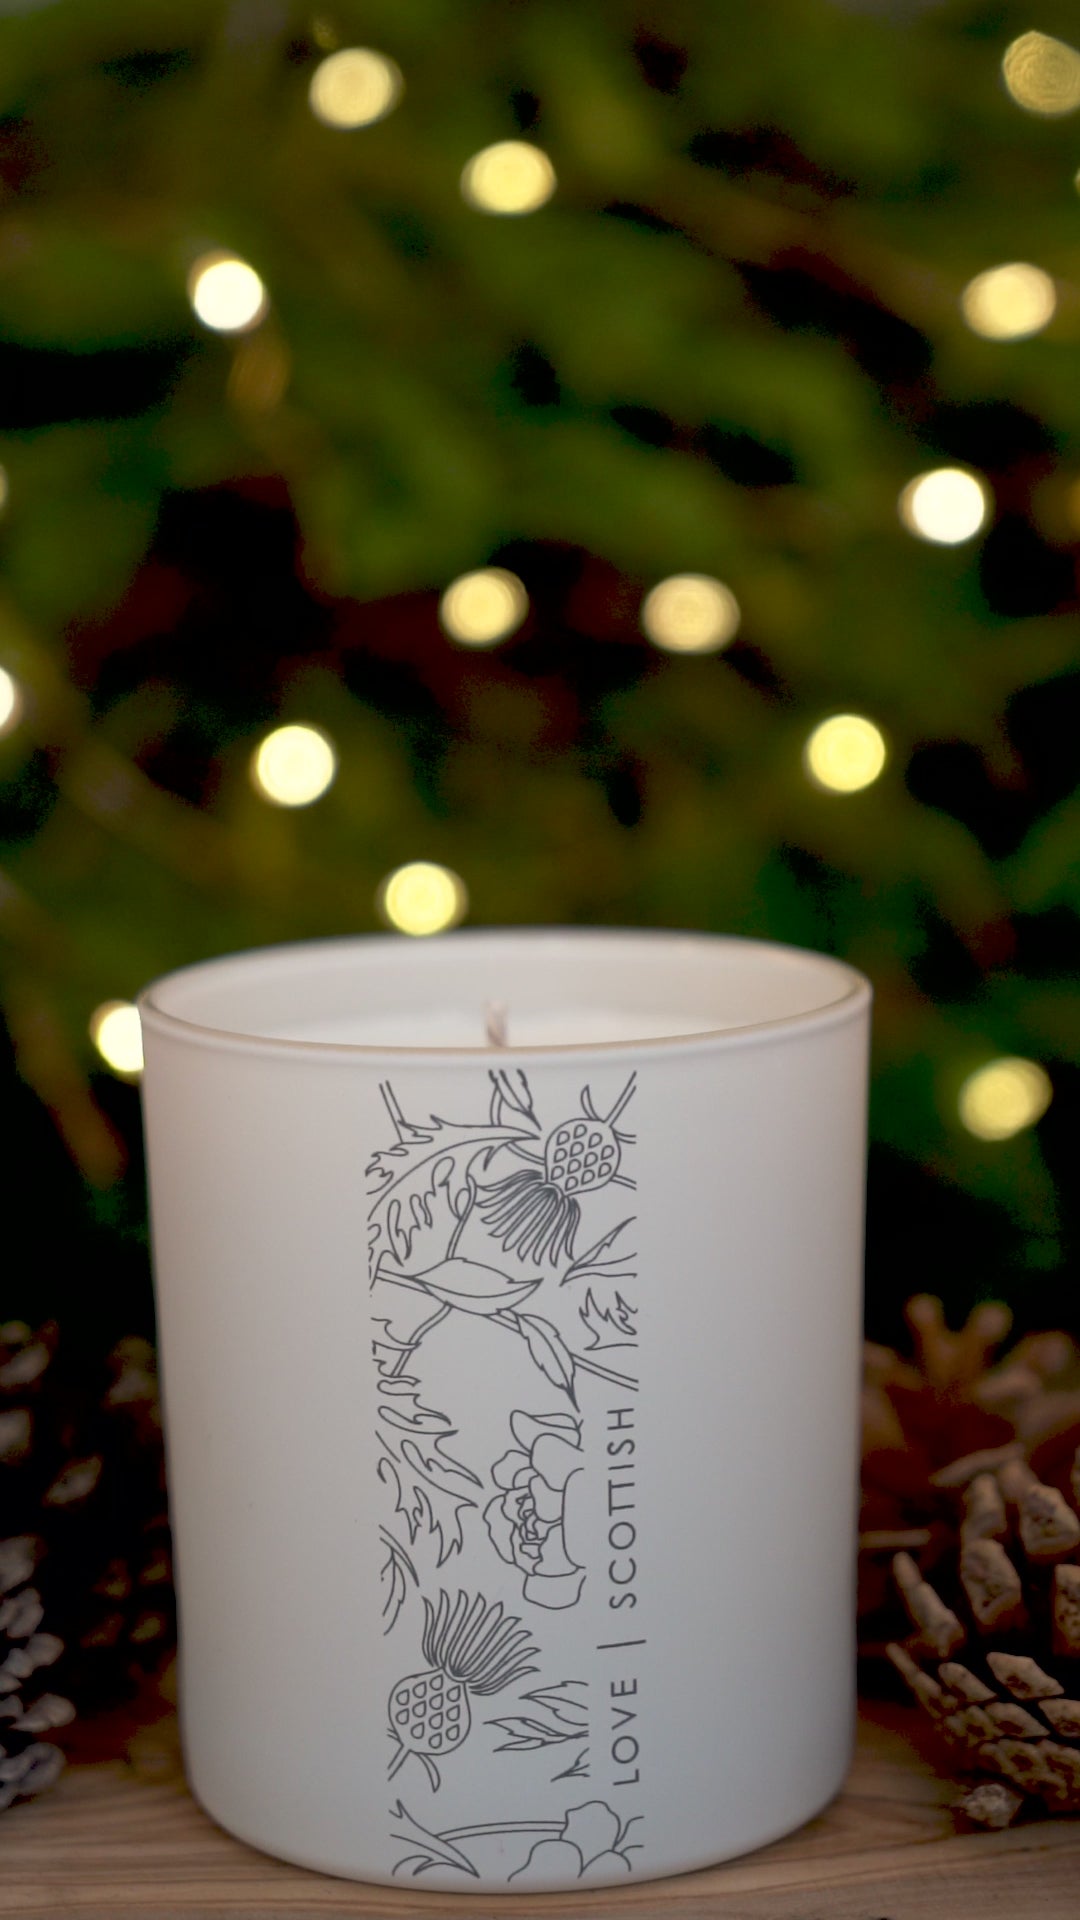 Love Scottish Snowy Nights Candle. Made in Scotland.